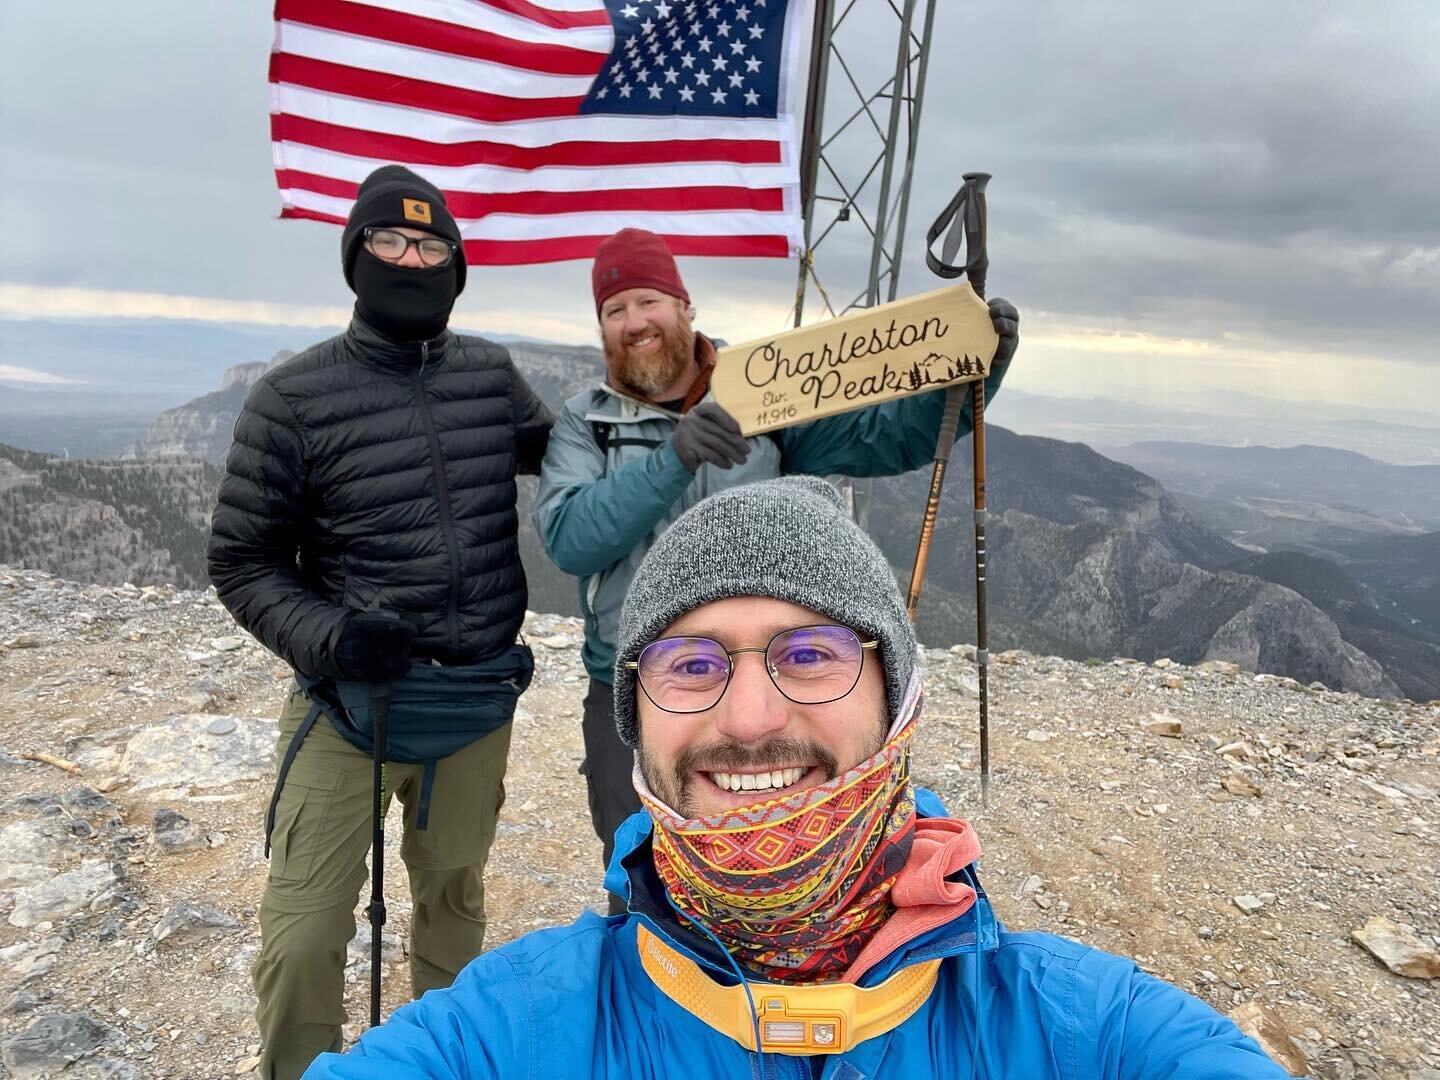 Still reeling &amp; recovering after finally (after previous attempts in 2017 &amp; 2018) climbing to the peak of Mt. Charleston outside Vegas yesterday. 12,000 ft was a huge challenge for me, &amp; I couldn&rsquo;t have done it without my buds @mojp